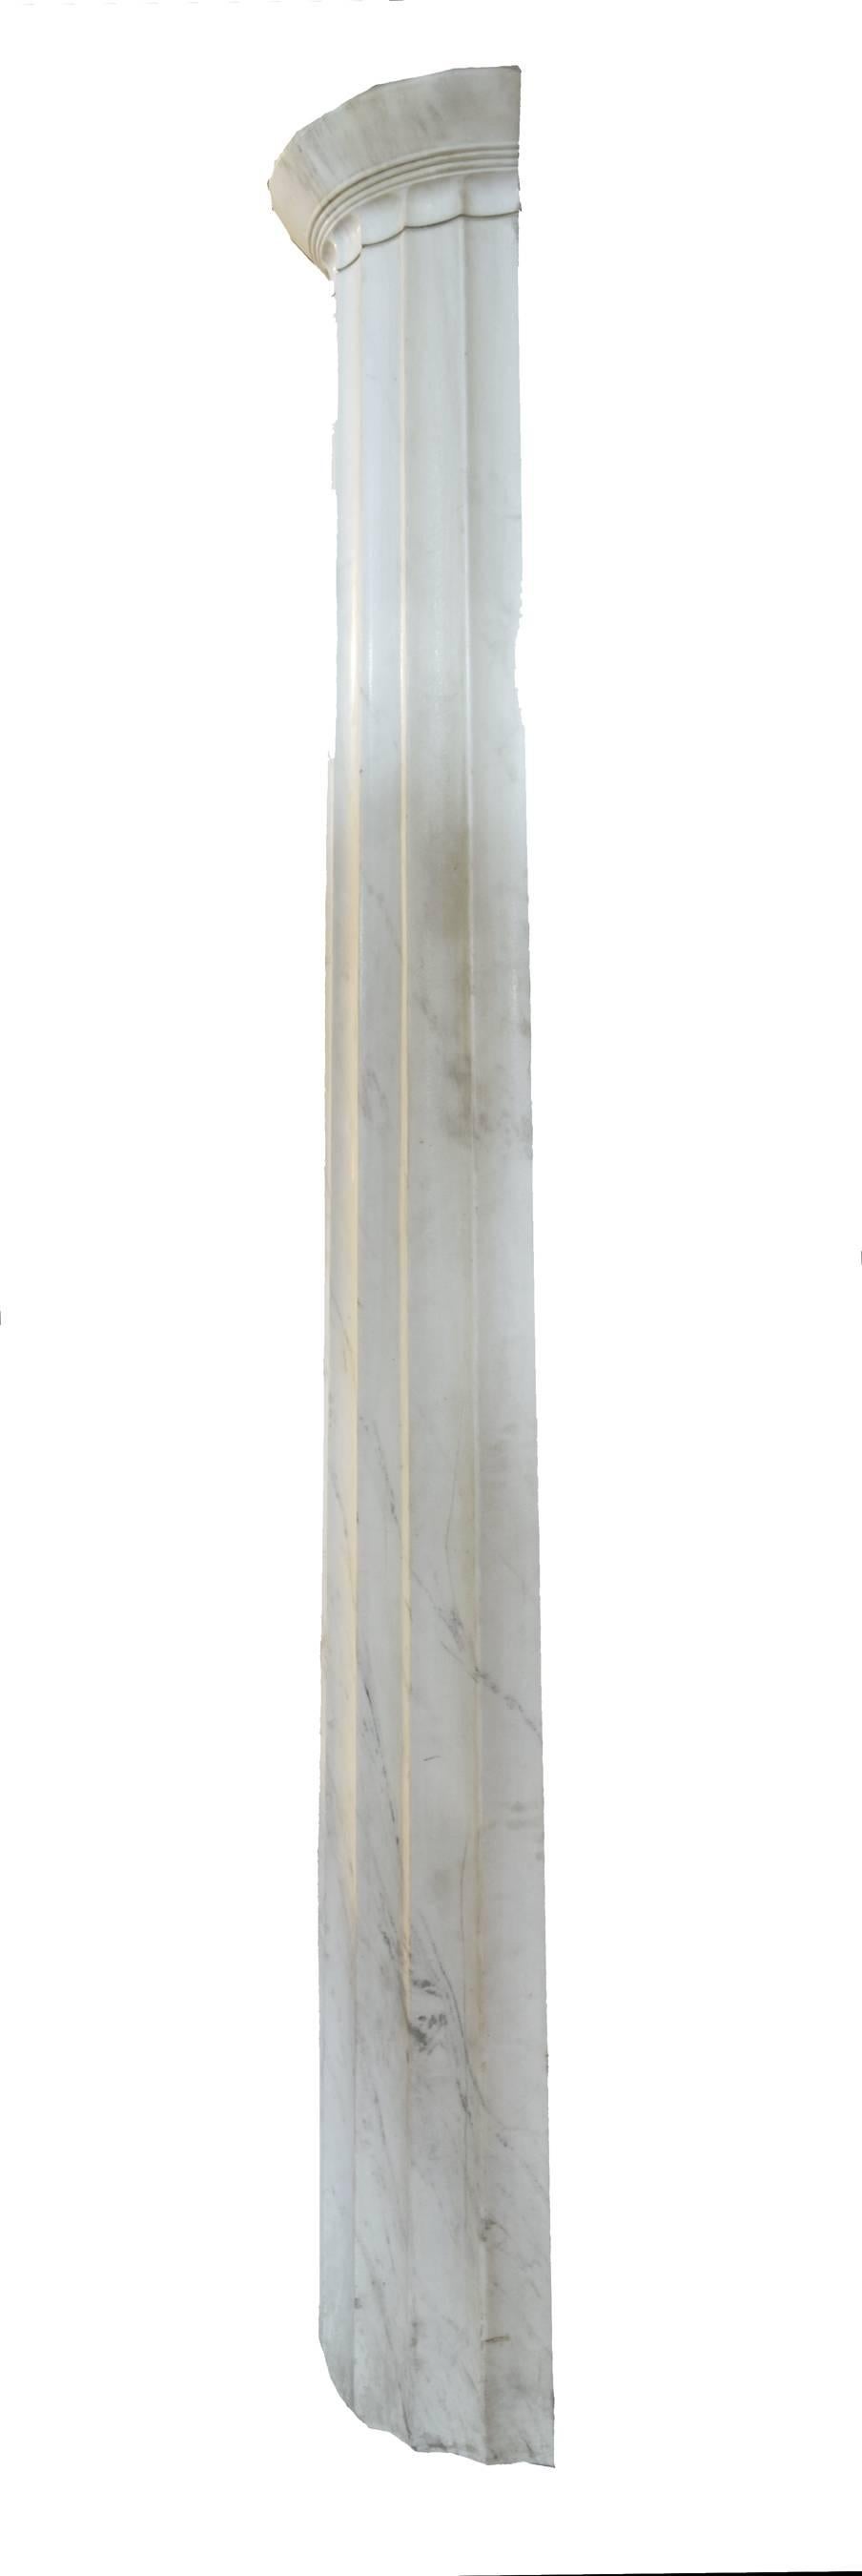 A pair of circa 1920 white marble fluted Doric pilasters. Carved of a single piece of marble. 
Four pairs available, priced per pair.